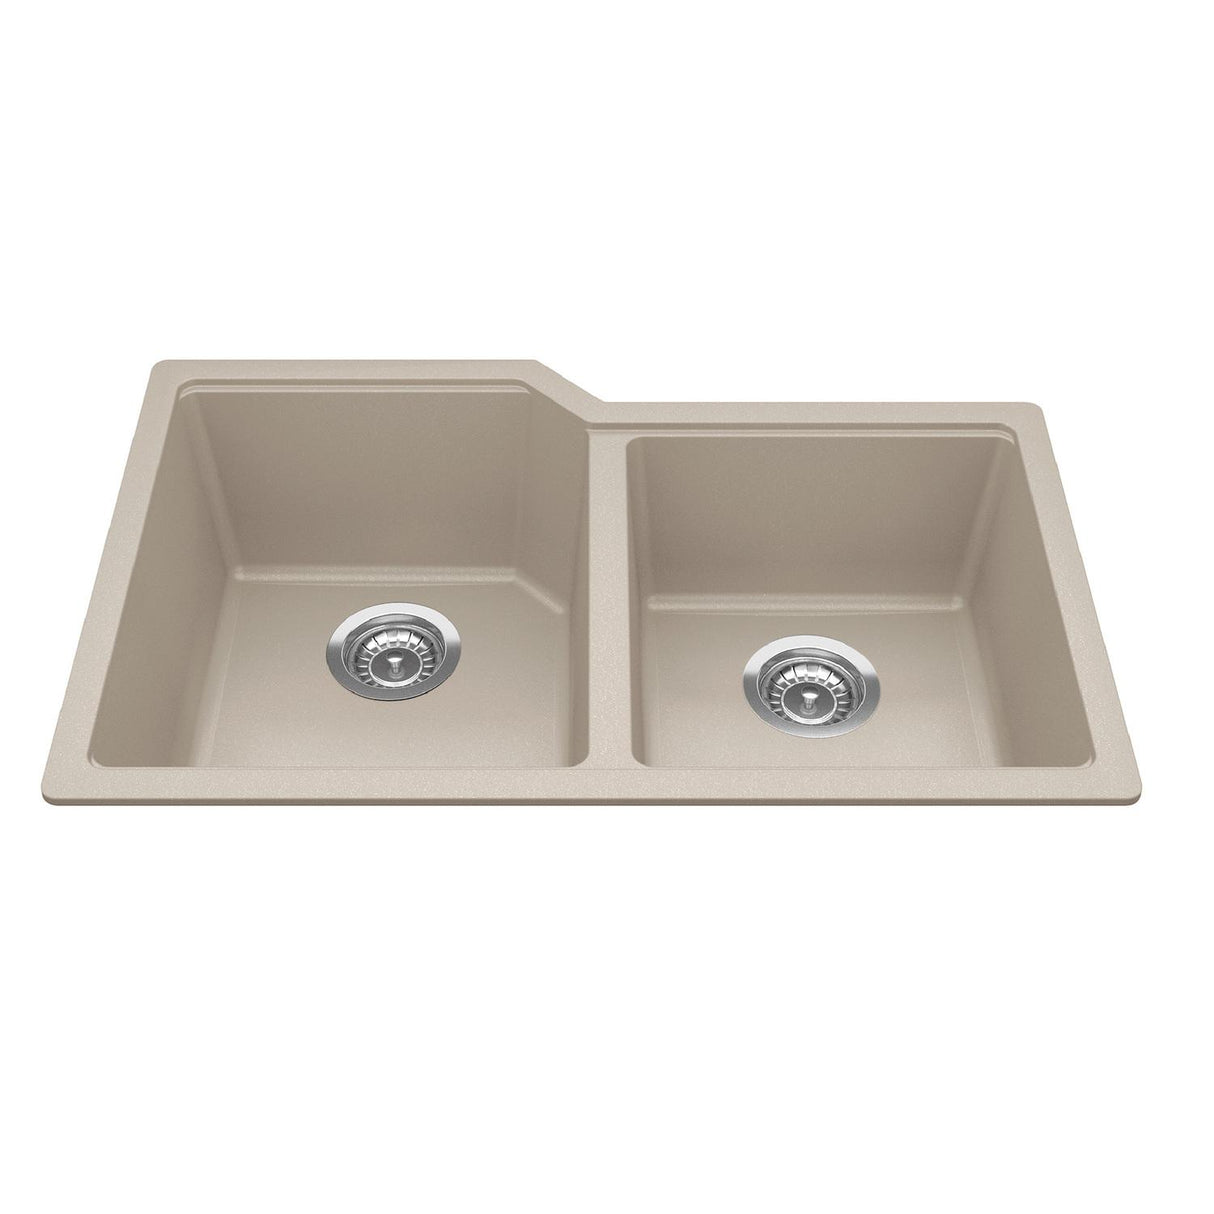 KINDRED MGC2031U-9CHAN Granite Series 30.69-in LR x 19.69-in FB Undermount Double Bowl Granite Kitchen Sink in Champagne In Champagne